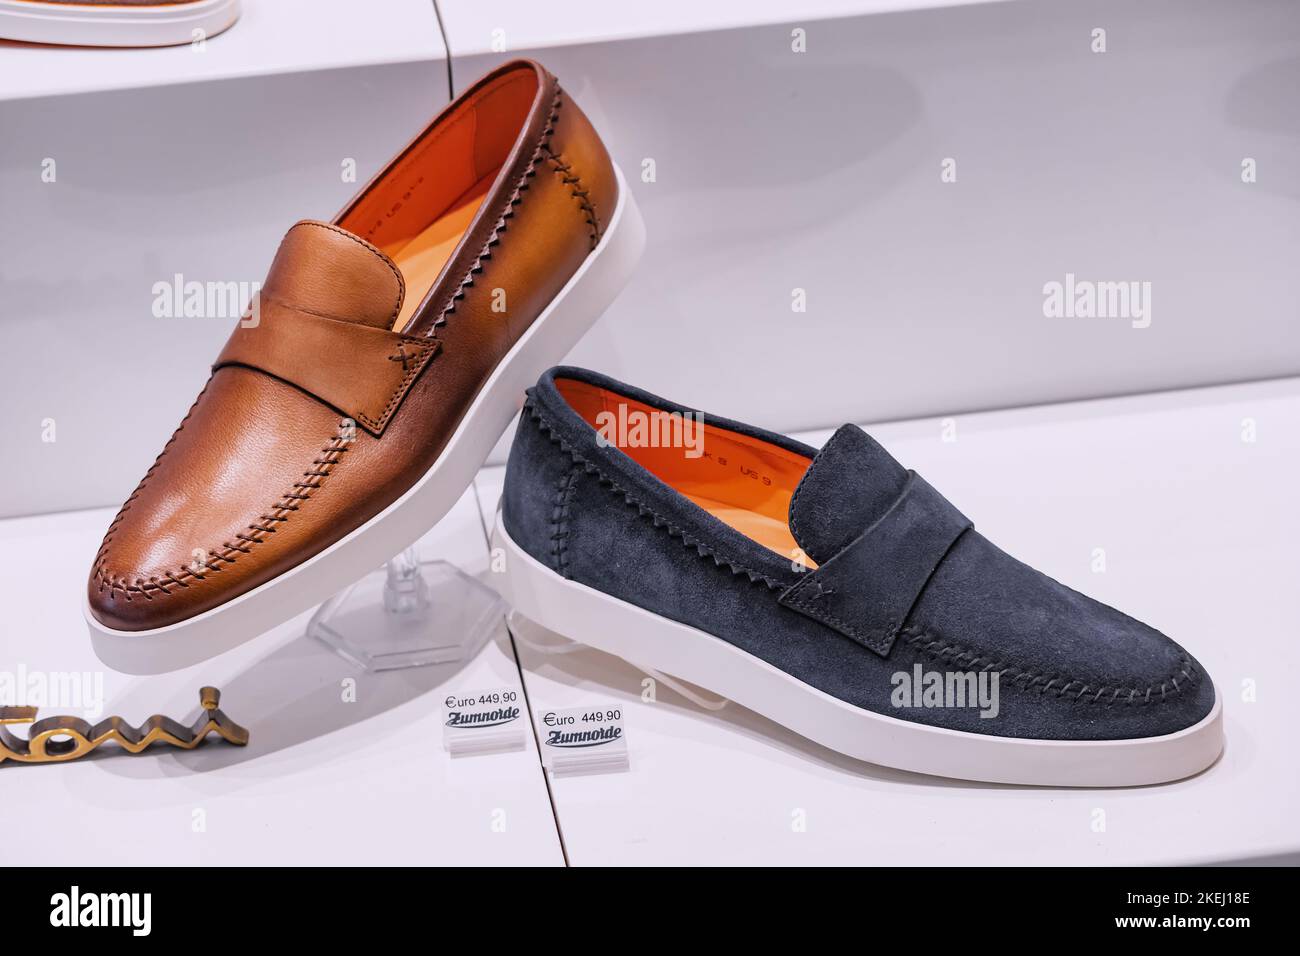 25 July 2022, Munster, Germany: Fashionable and vintage shoes or moccasins in the footwear shop window Stock Photo